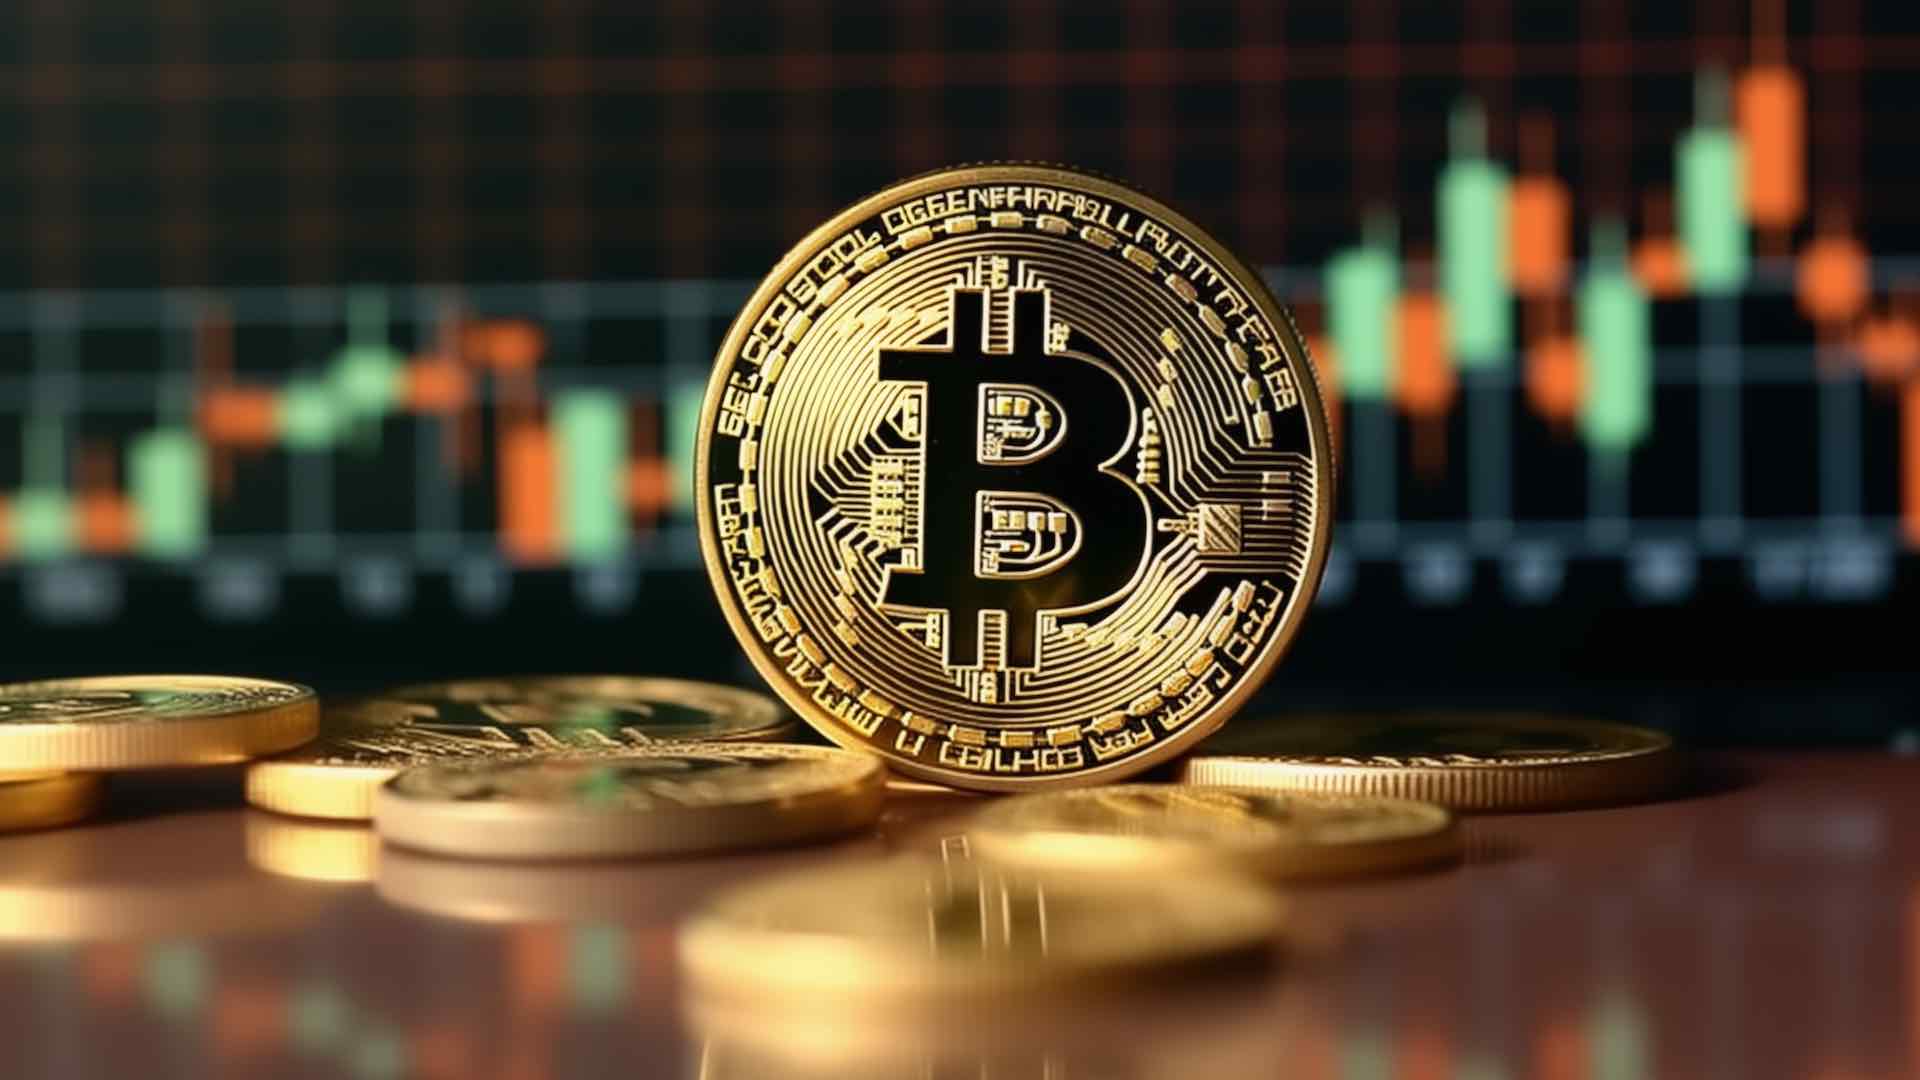 Bitcoin faced a downturn early Monday, slipping below the ,000 mark as volatility surged in anticipation of this month's looming block reward halving. Currently trading at around $69,565, Bitcoin experienced a 1.1% dip within the day, according to data from CoinGecko. Despite this, it retains a nearly 4% increase over the week. As the Bitcoin halving approaches, a key indicator of the cryptocurrency's volatility has witnessed a notable spike. Bitcoin's 30-day annualized realized volatility peaked at 63.76% last week, maintaining levels above 60% as per Glassnode data.

This surge marks its highest point since August 2022. Realized volatility, measuring the standard deviation in returns over a specified period, reflects heightened price risk during this time frame. Late in March, Beam CEO Andy Bromberg suggested that the recent volatility in Bitcoin signifies a "crisis of faith" among traders ahead of the block reward halving event. Scheduled every four years, the Bitcoin halving involves cutting the block reward allocated to miners by half, effectively managing the distribution of its fixed 21 million supply.

The upcoming 2024 halving will reduce mining rewards from 6.25 BTC to 3.125 BTC. While historical trends suggest a surge in Bitcoin's price following each halving, analysts caution that such expectations may already be factored into the market. Additionally, a recent Coinbase report highlights that previous price rallies correlated with broader macroeconomic events like the COVID-19 pandemic and resulting fiscal stimulus measures. The 2024 halving stands out due to Bitcoin's price hitting an all-time high ahead of the event. Propelled by the approval of several U.S. spot Bitcoin ETFs in January, these funds absorbed Bitcoin from the market.

In the lead-up to the halving event, where the production of new Bitcoin is poised to decline, the resultant dynamic could pave the way for a shortage in available Bitcoin across the market. This scarcity, identified and favorably regarded by certain analysts, carries significant implications. It suggests an impending imbalance between supply and demand, wherein the anticipated reduction in supply intersects with potential heightened demand. Consequently, this imbalance may catalyze an upward trajectory in Bitcoin prices, buoying a bullish sentiment among investors as they anticipate the halving's impact on the cryptocurrency's supply-demand dynamics and its subsequent influence on market trends.